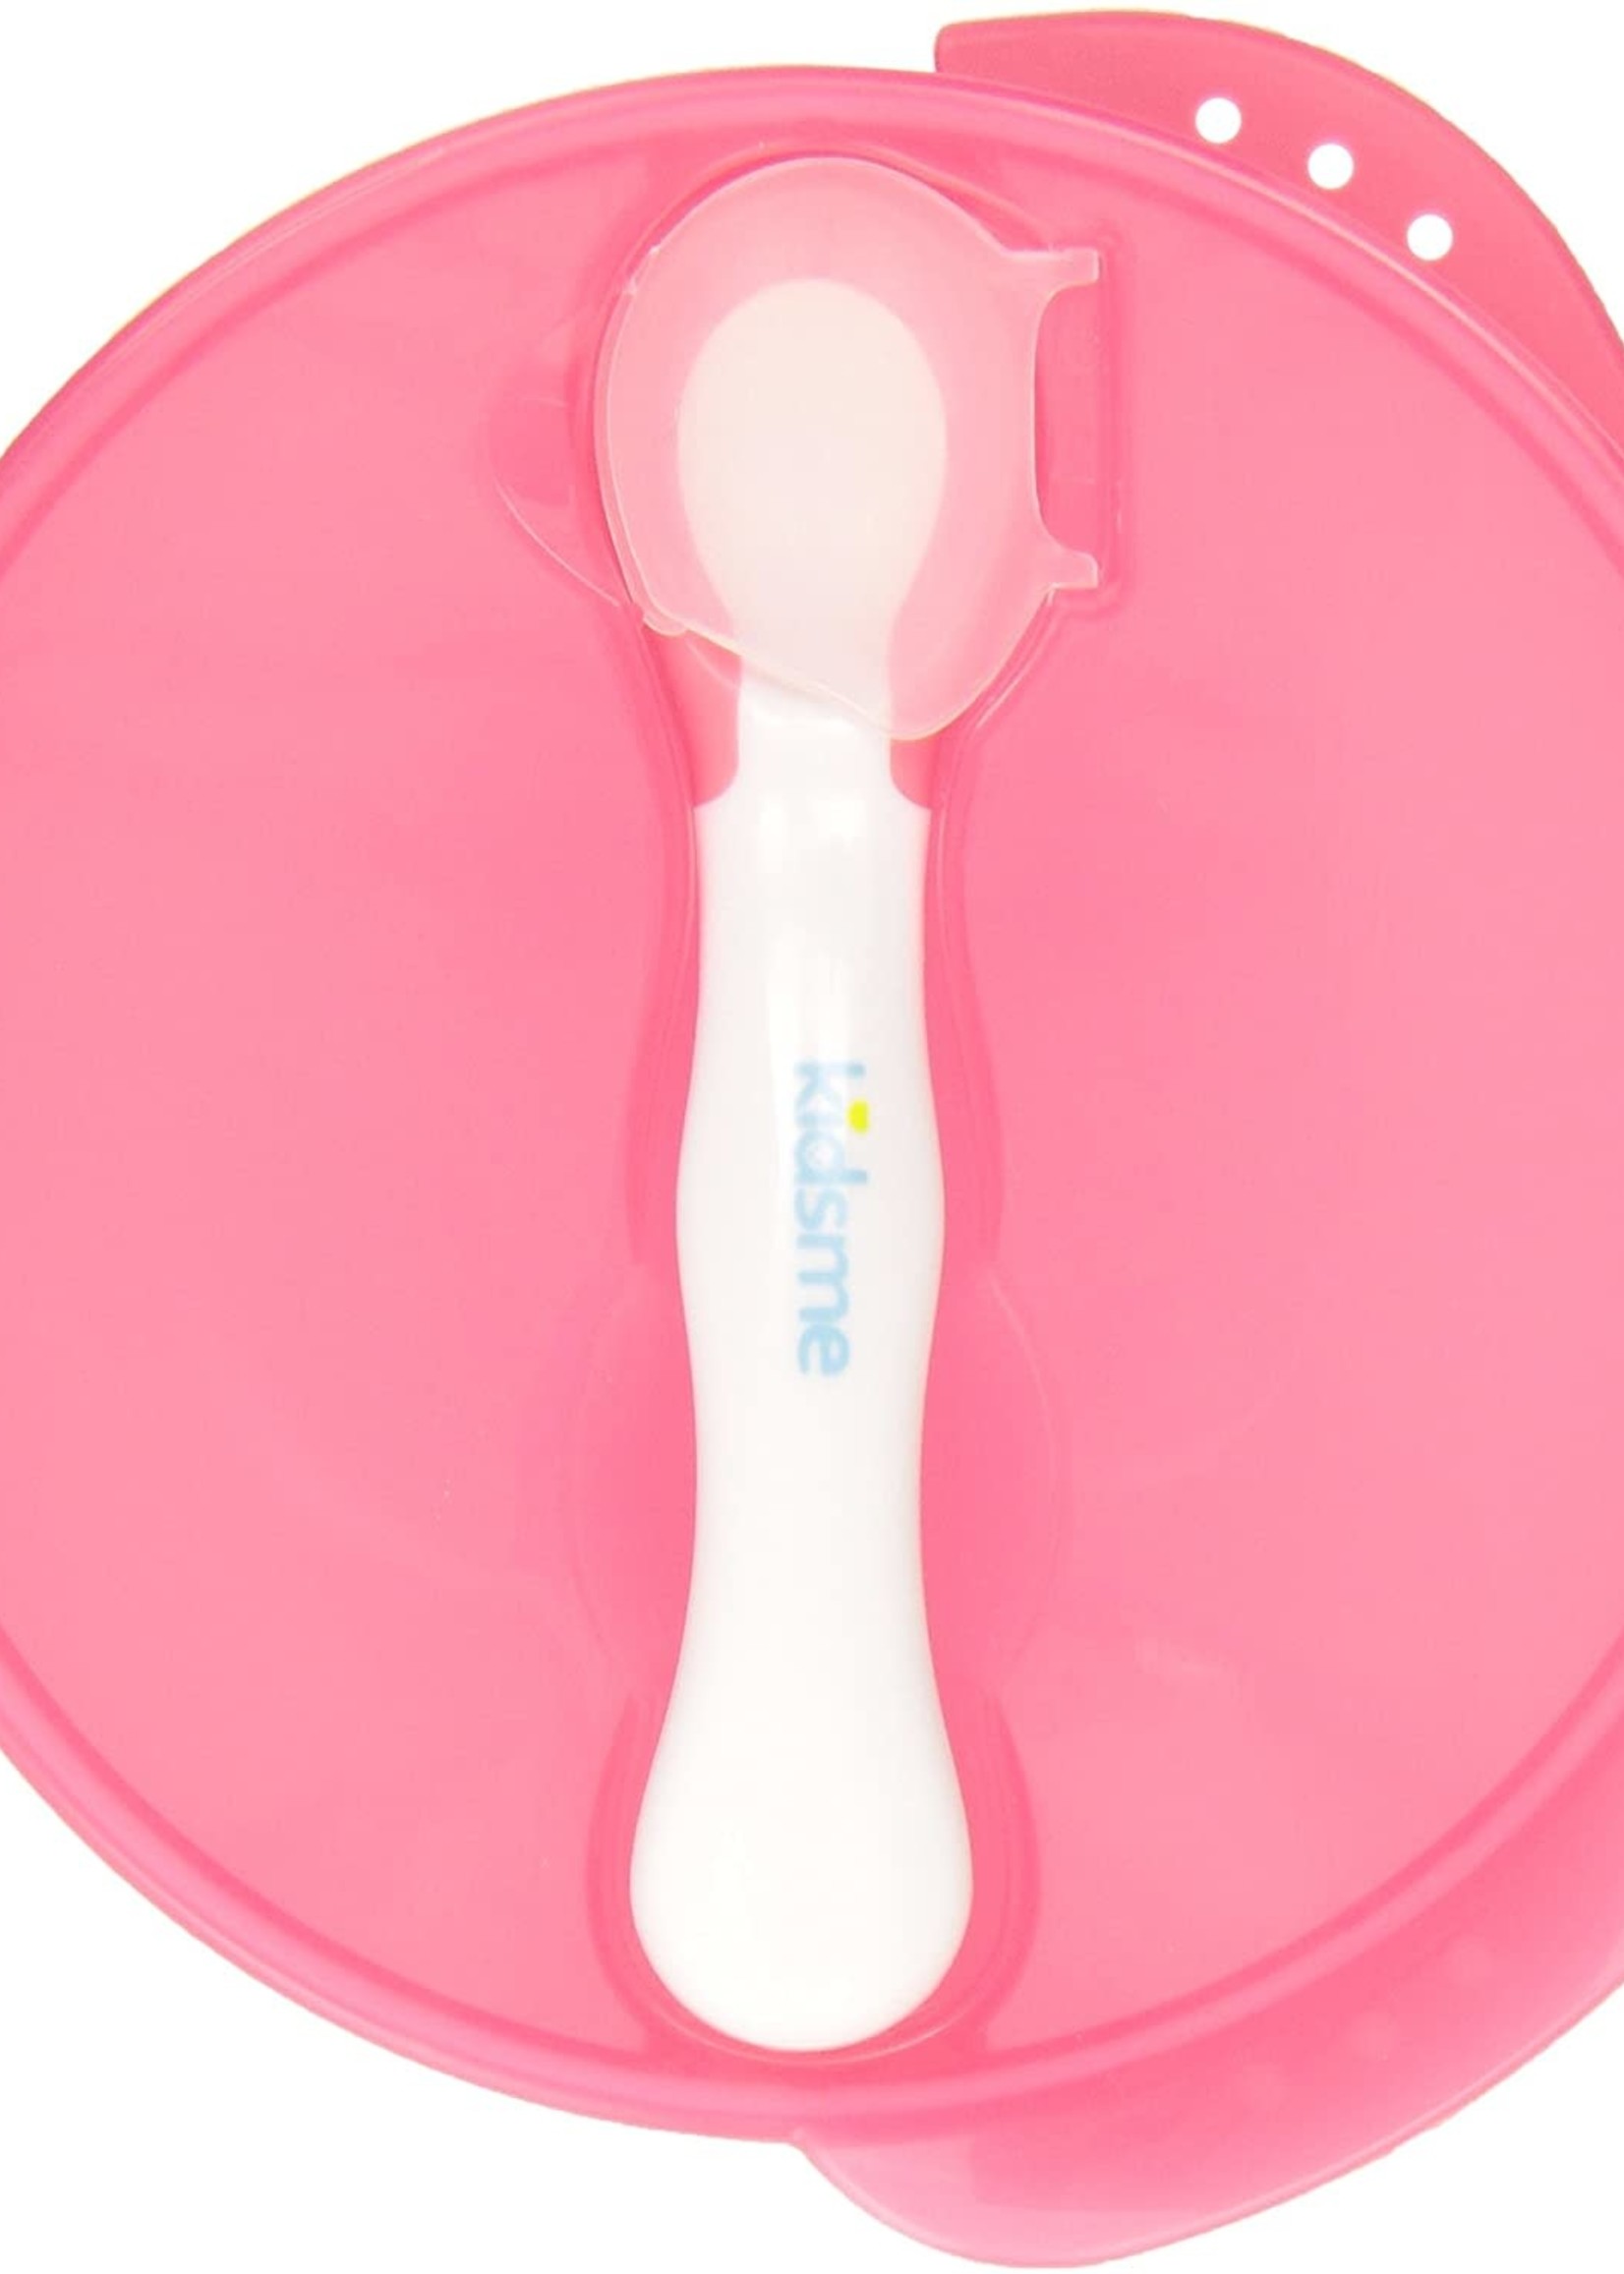 Kidsme Suction Bowl with Ideal Temperature Spoon